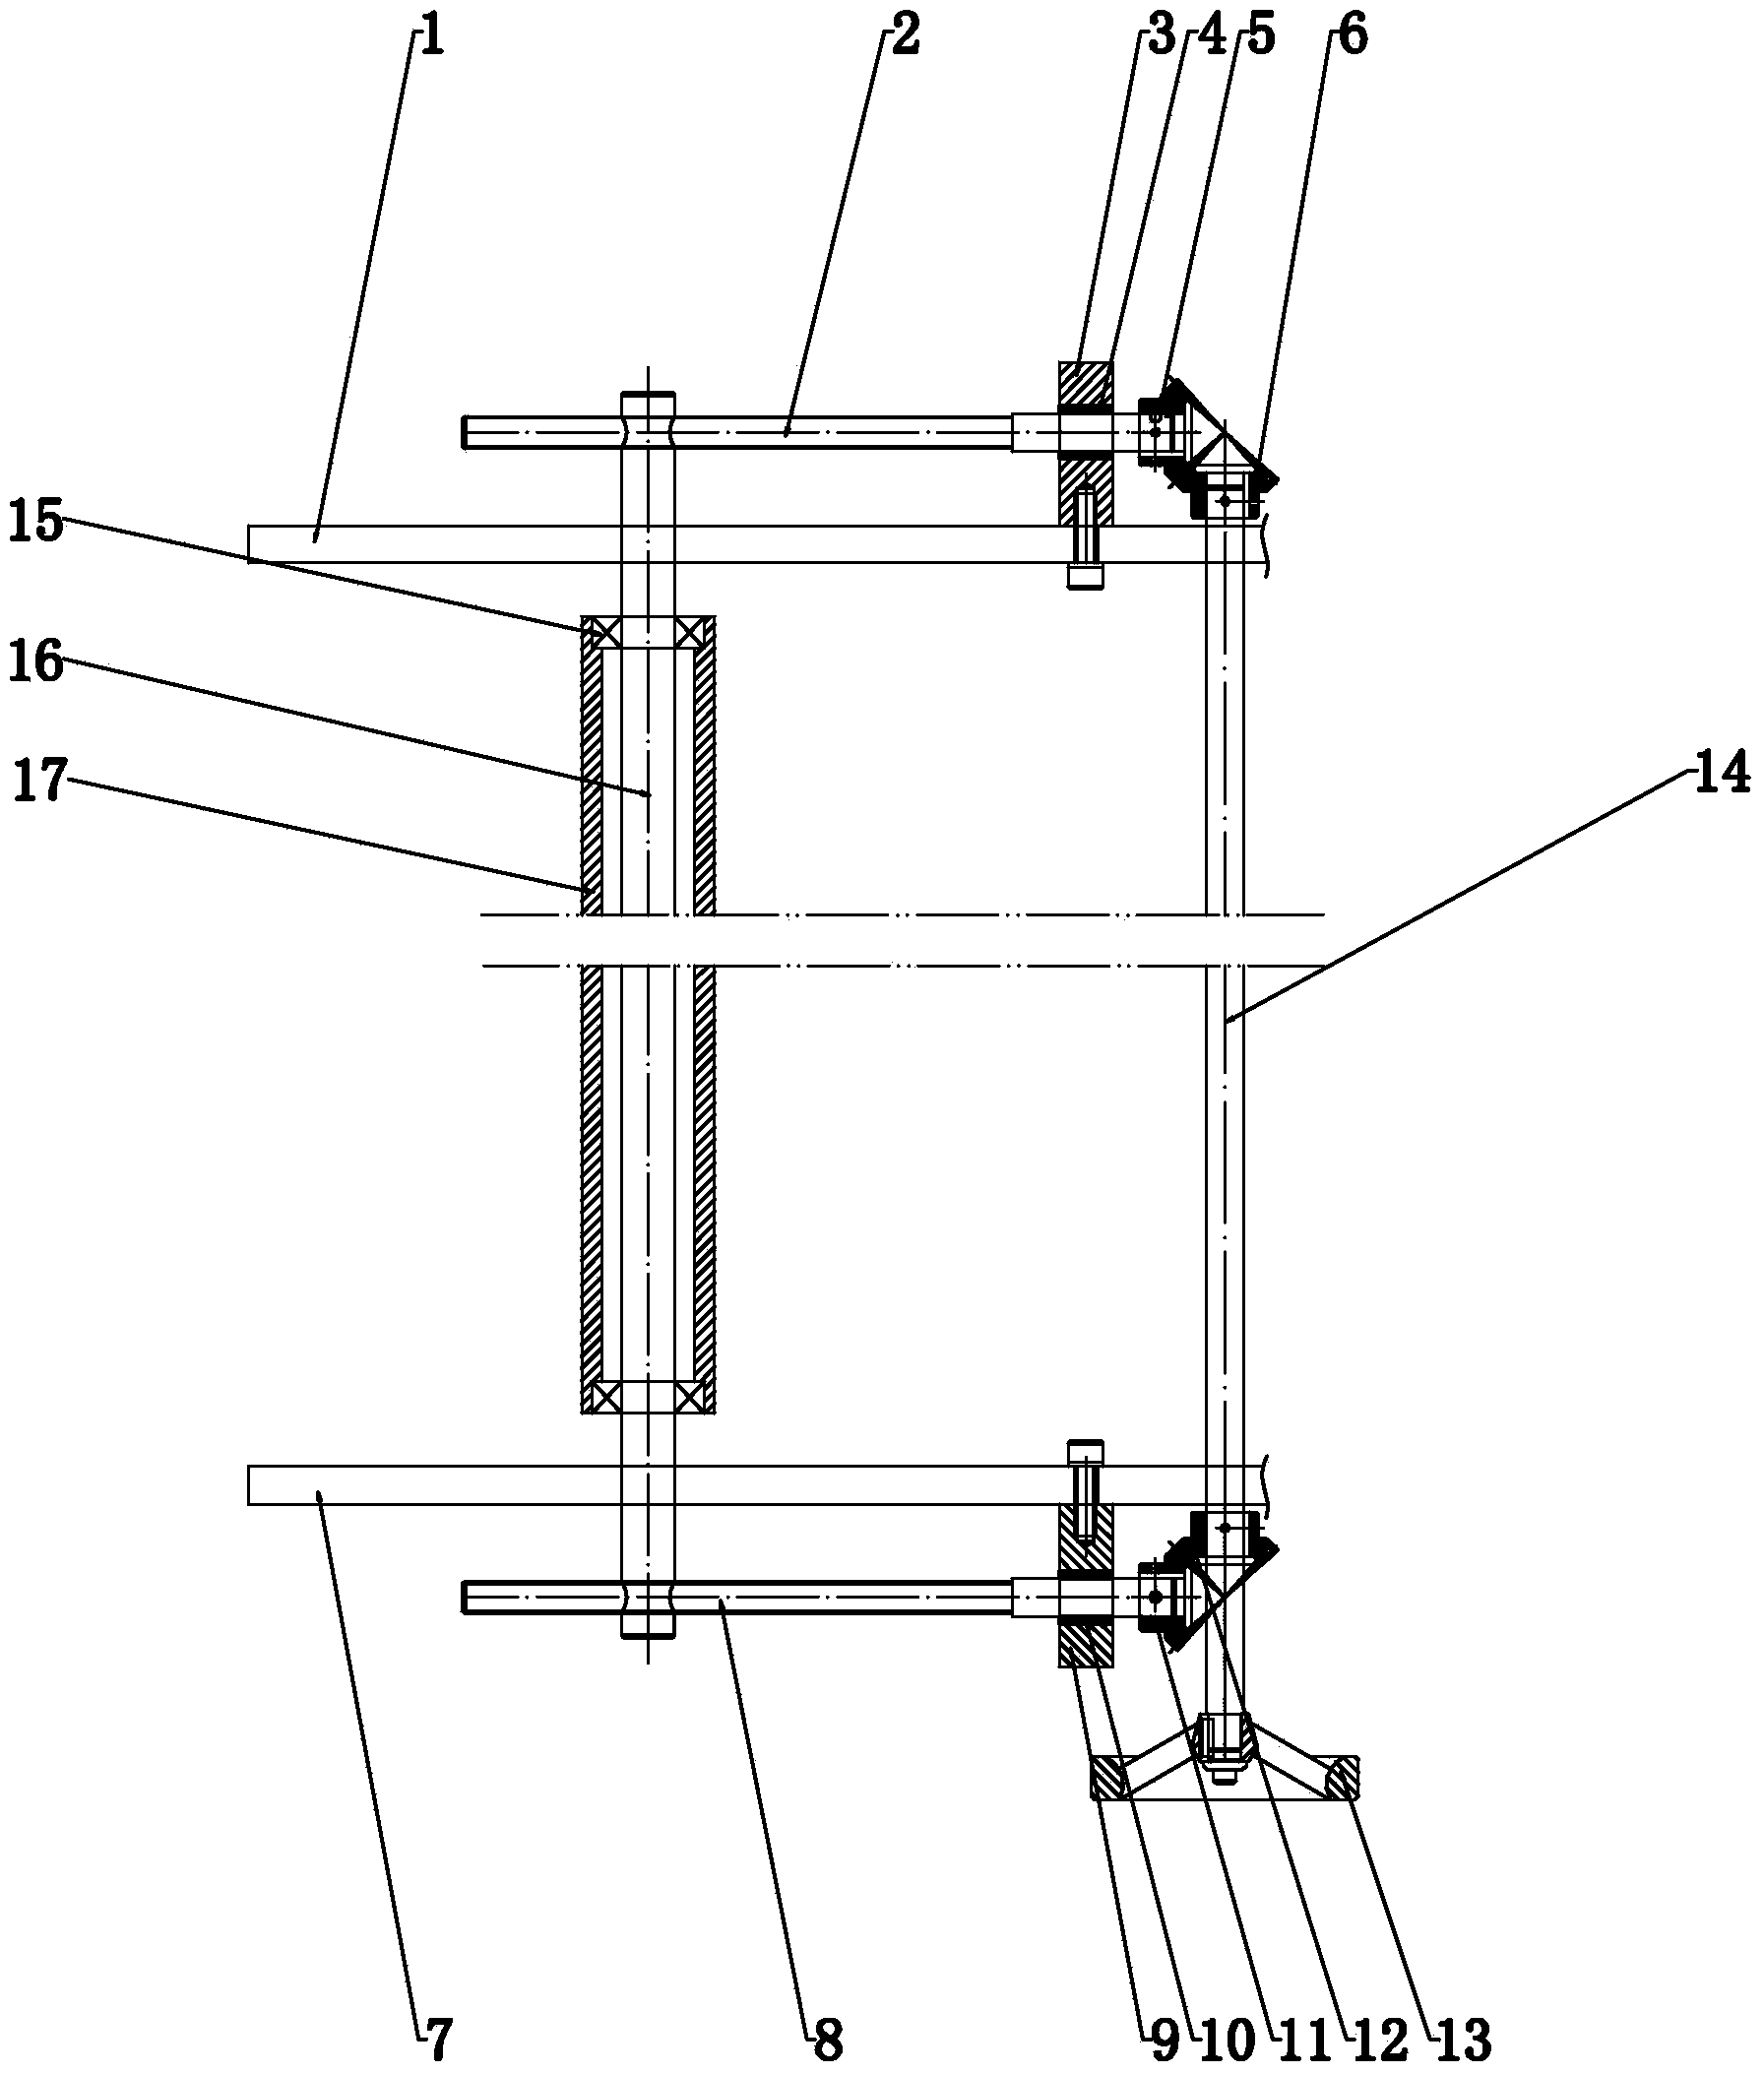 Opposite-cutting adjusting device for bag making machine